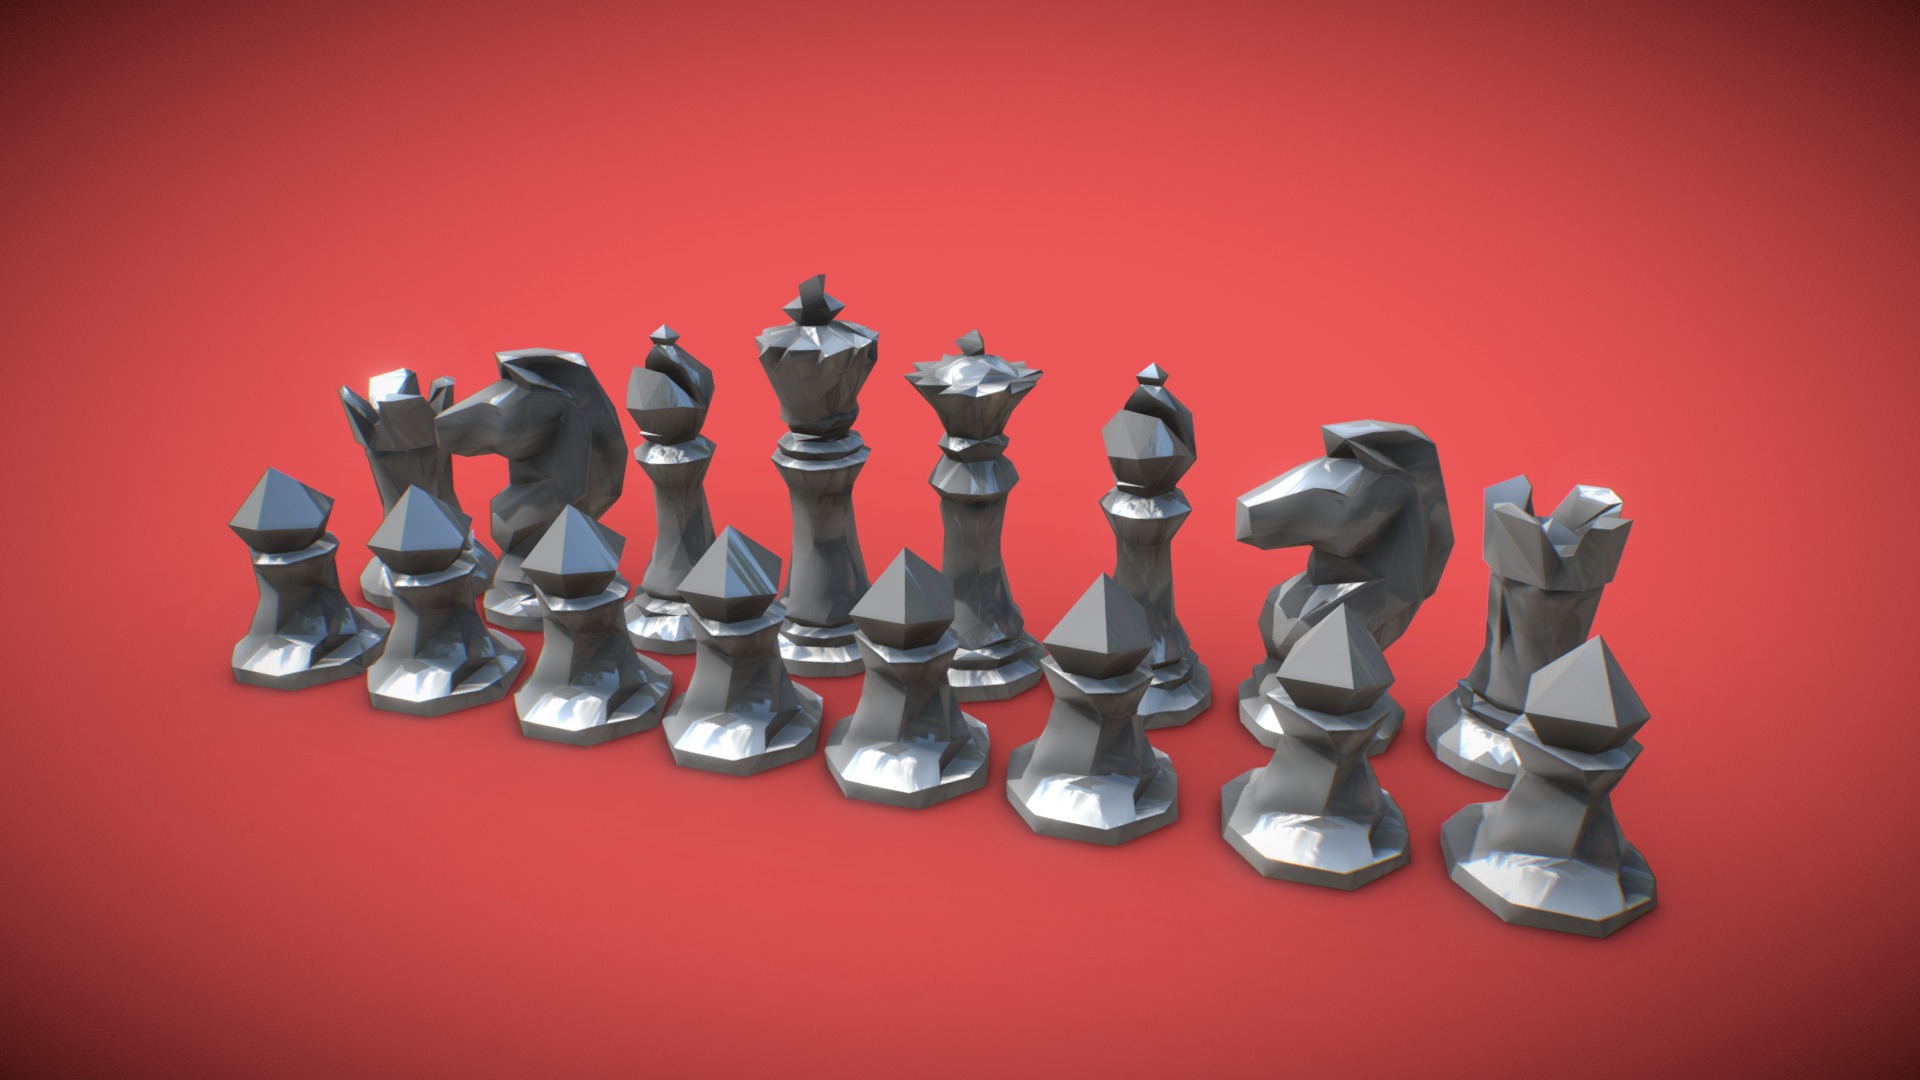 3D model Faceted Chess Set for 3D Printing - This is a 3D model of the Faceted Chess Set for 3D Printing. The 3D model is about a chess board with black pieces.